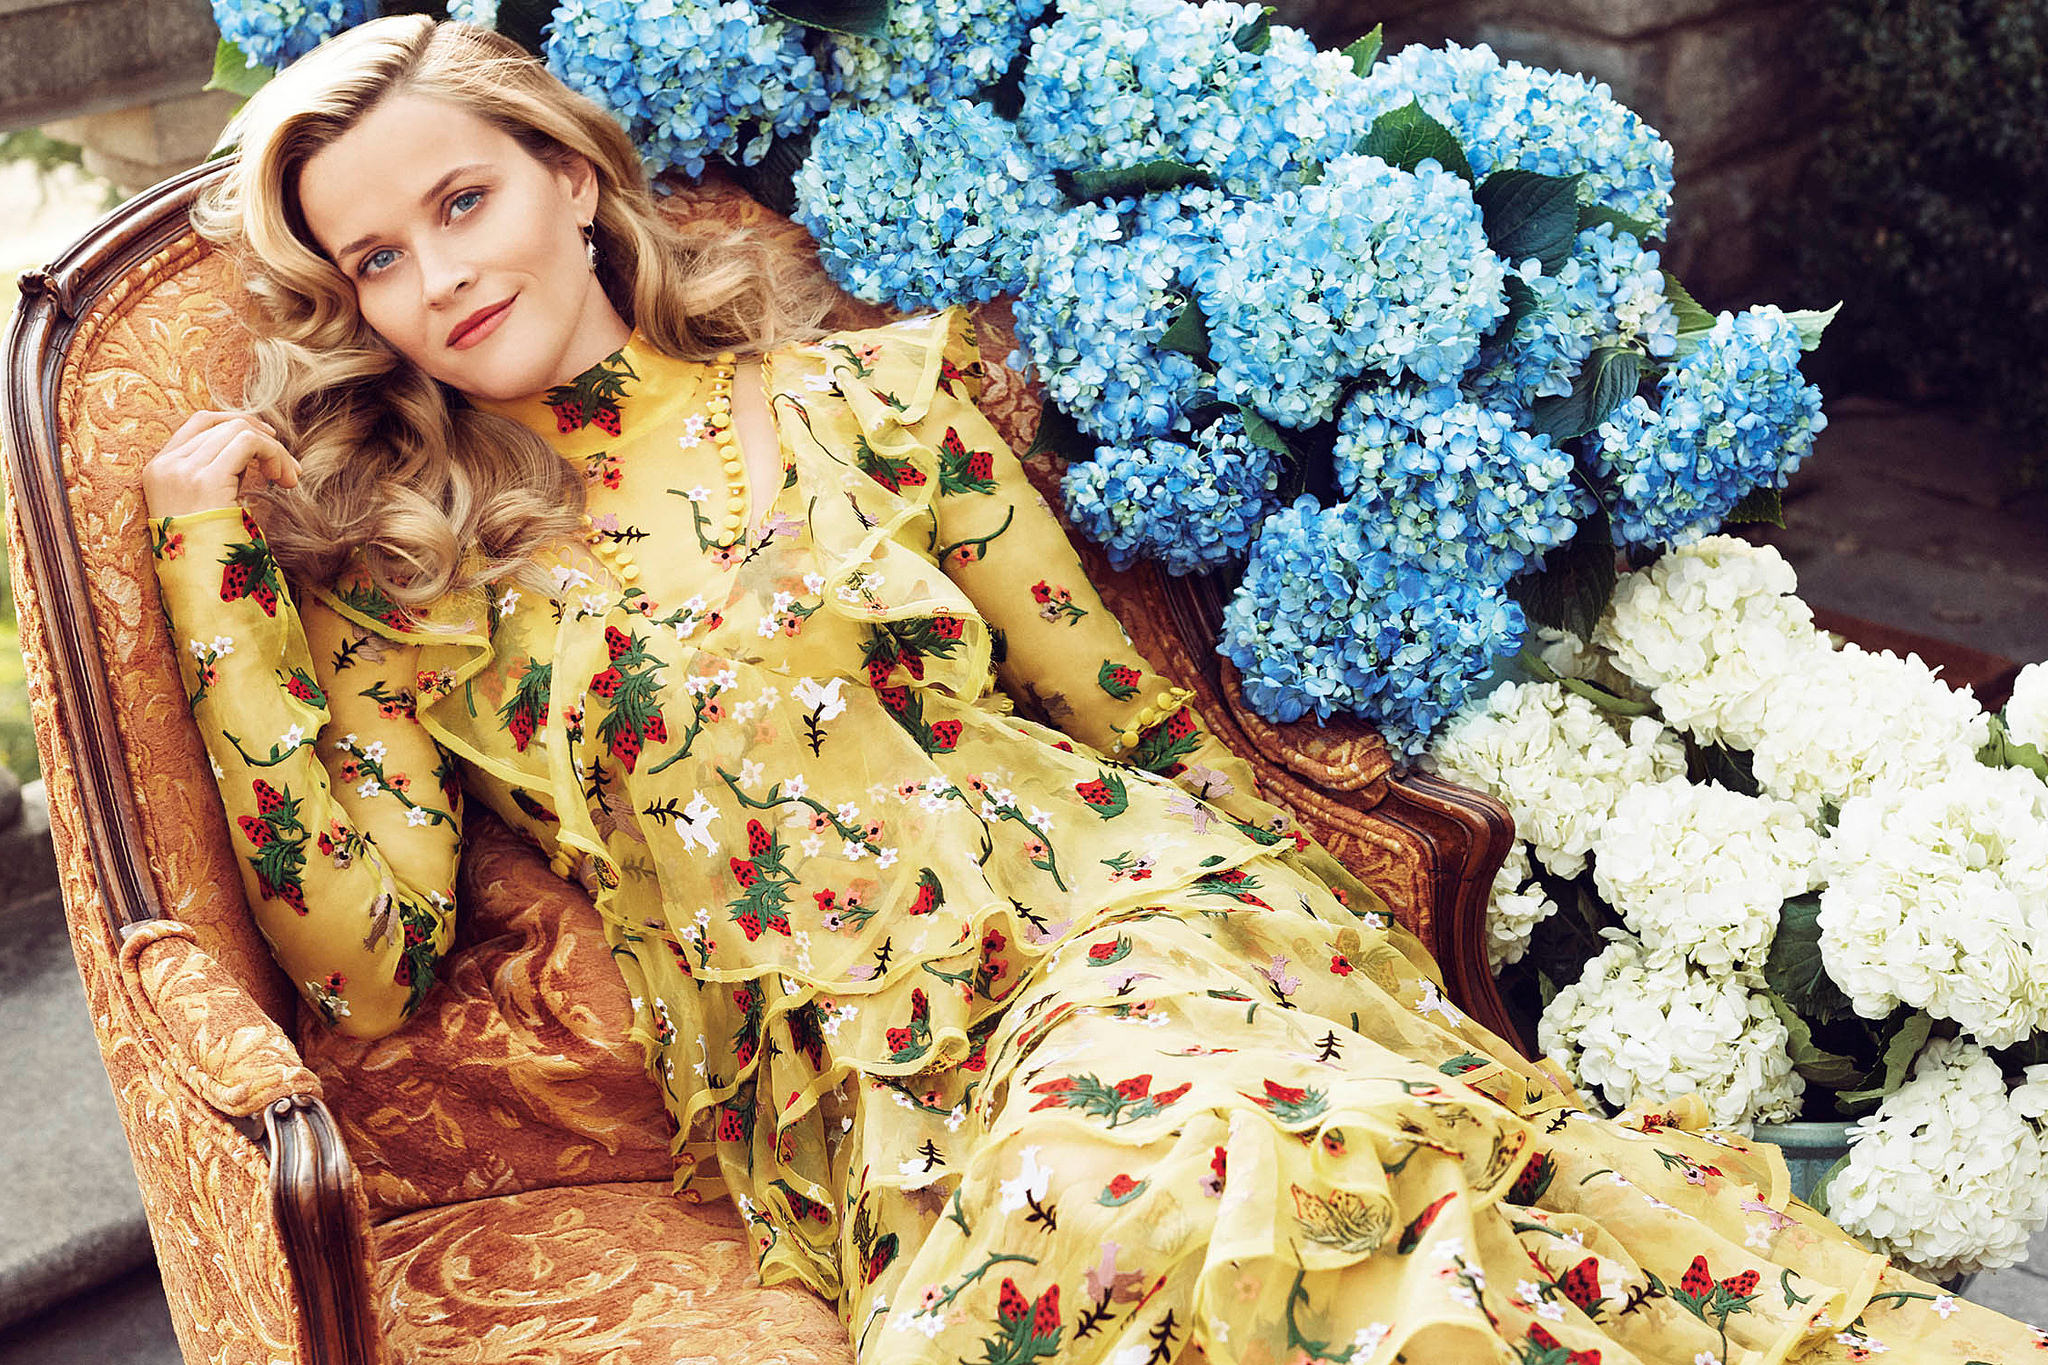 Reese Witherspoon photo 1444 of 2502 pics, wallpaper - photo #827236 ...